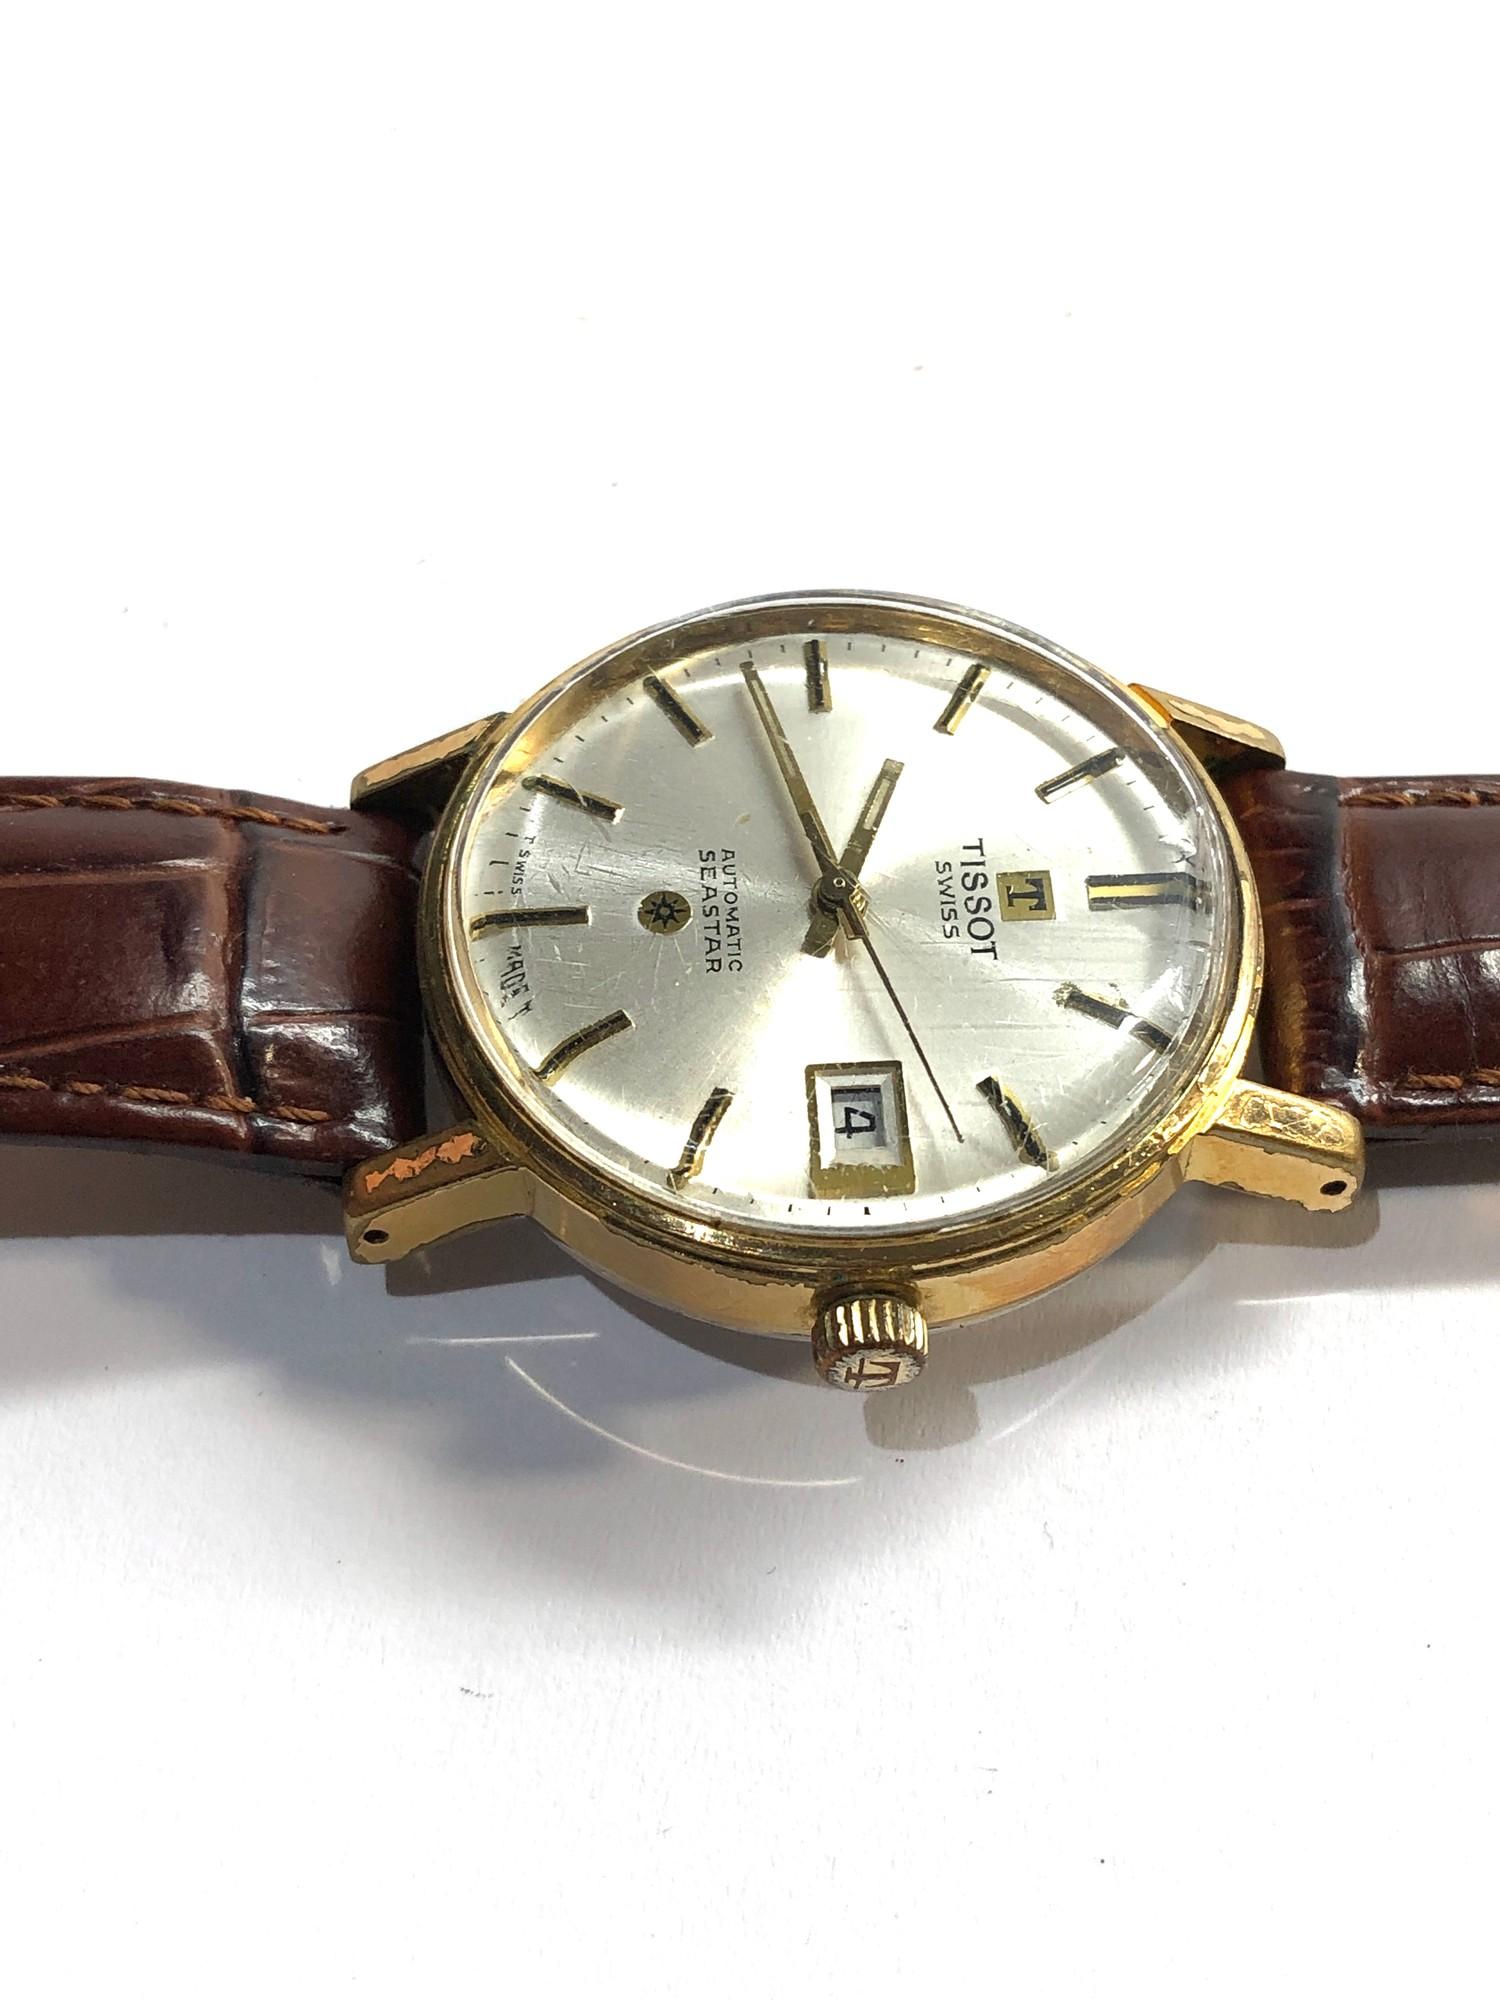 Vintage Tissot automatic seastar date gents wristwatch in good overall condition working order but - Image 2 of 4